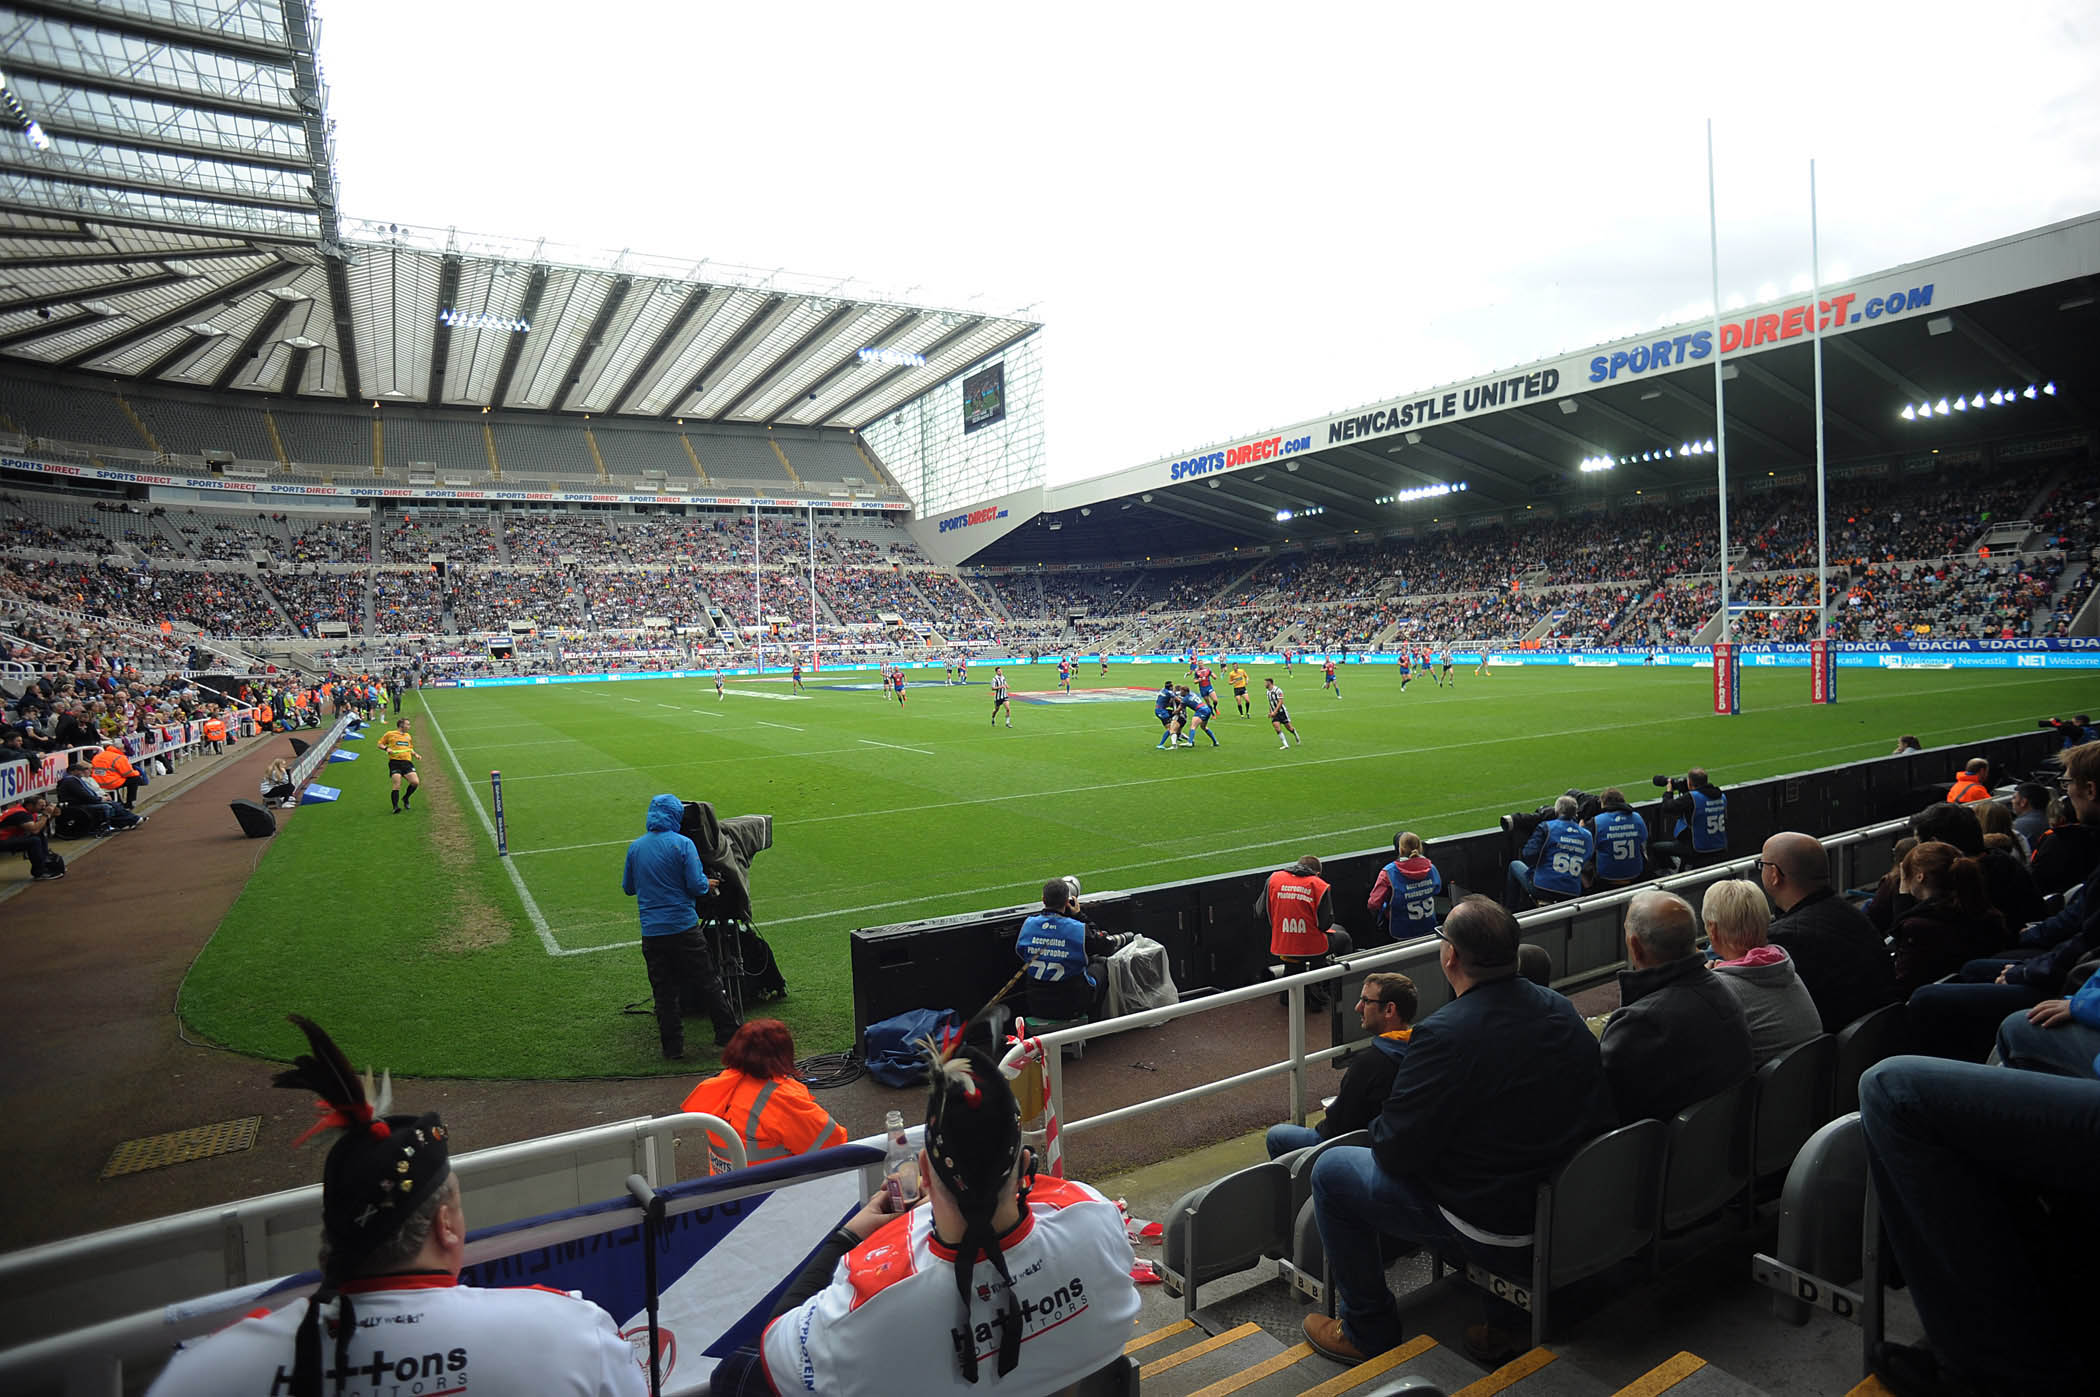 Rugby League Today: Magic Weekend fixtures, GB ref criticised & teams qualify for World Cup